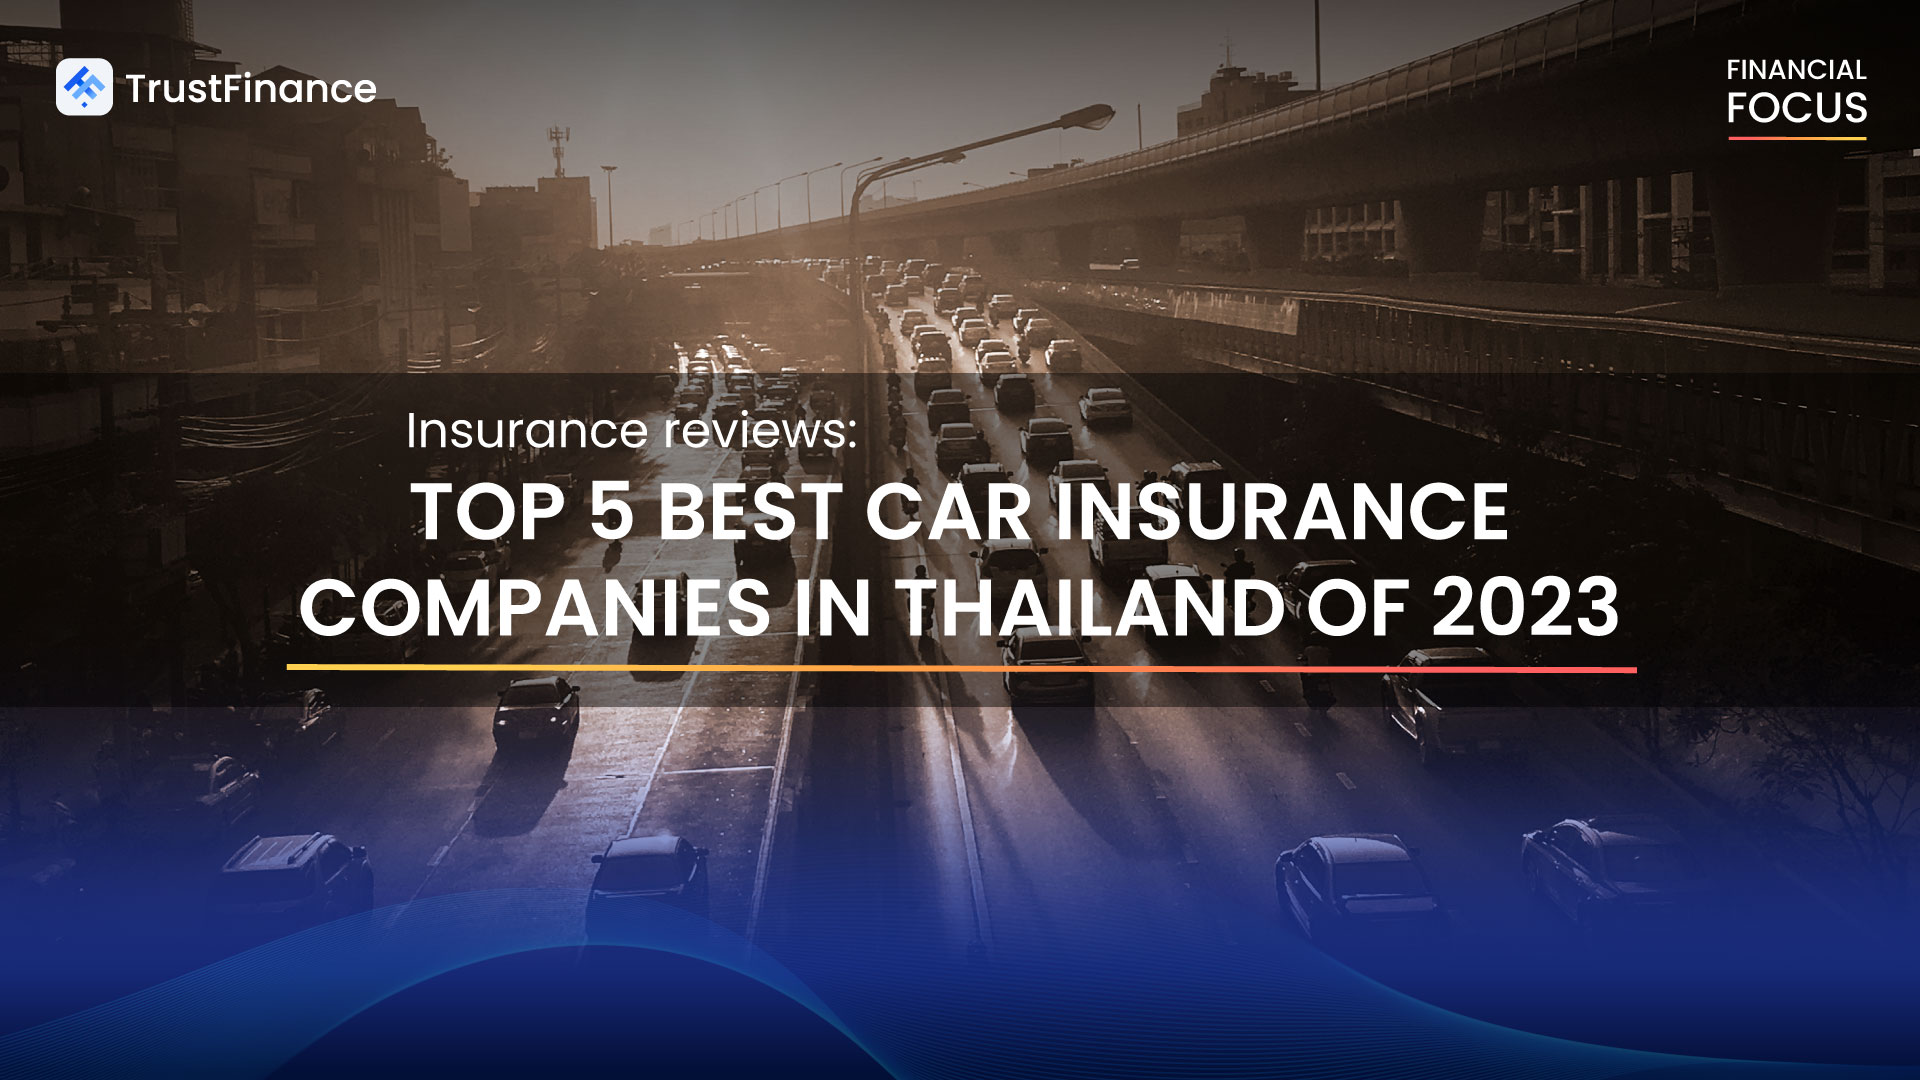 Insurance review: 5 Best Car Insurance Companies in Thailand of 2023 